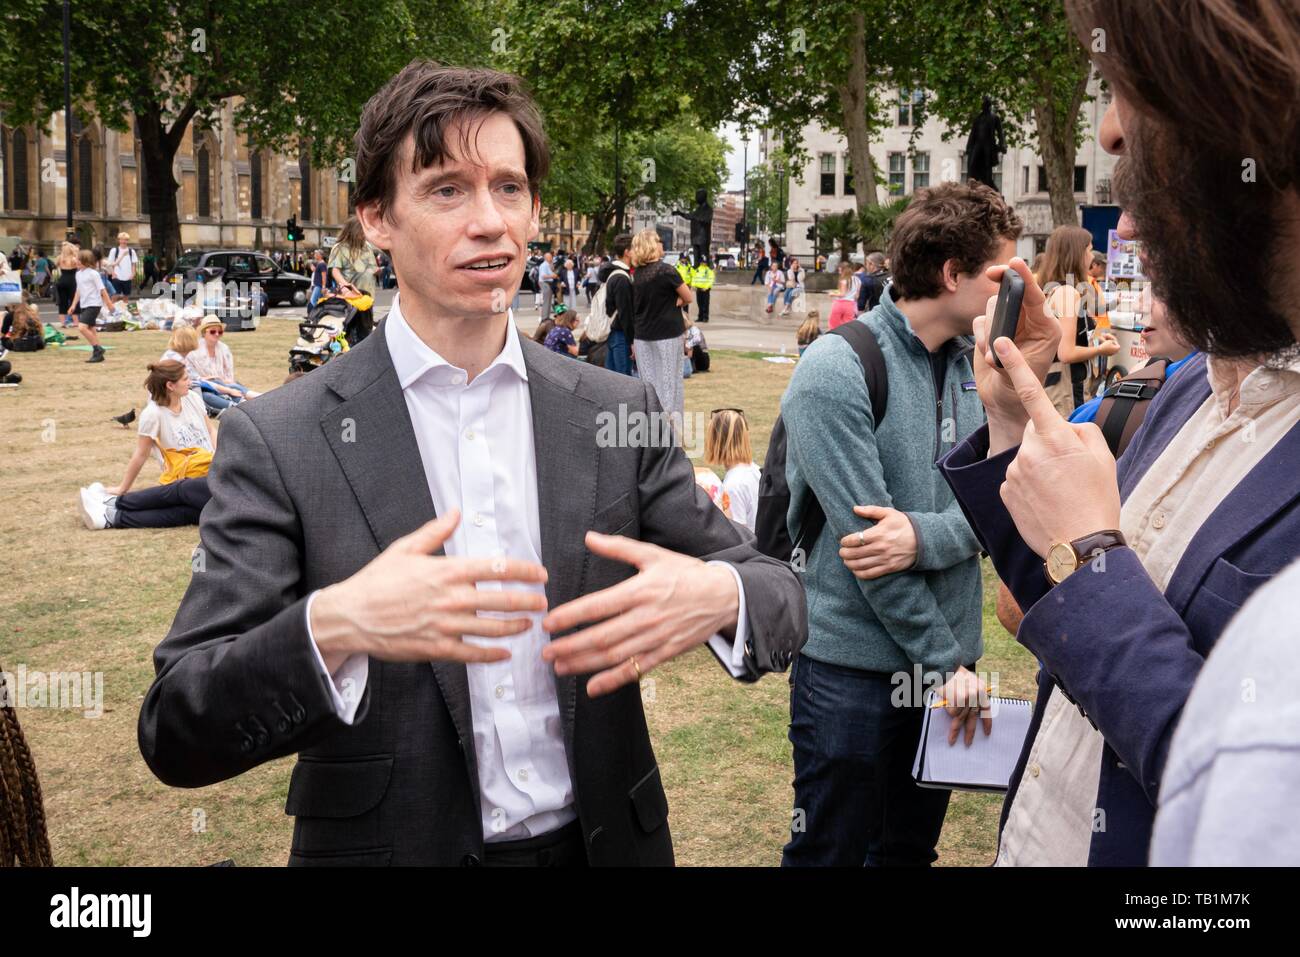 London, UK. 24th May, 2019. Rory Stewart at the second annual Global Strike 4 Climate. Stock Photo